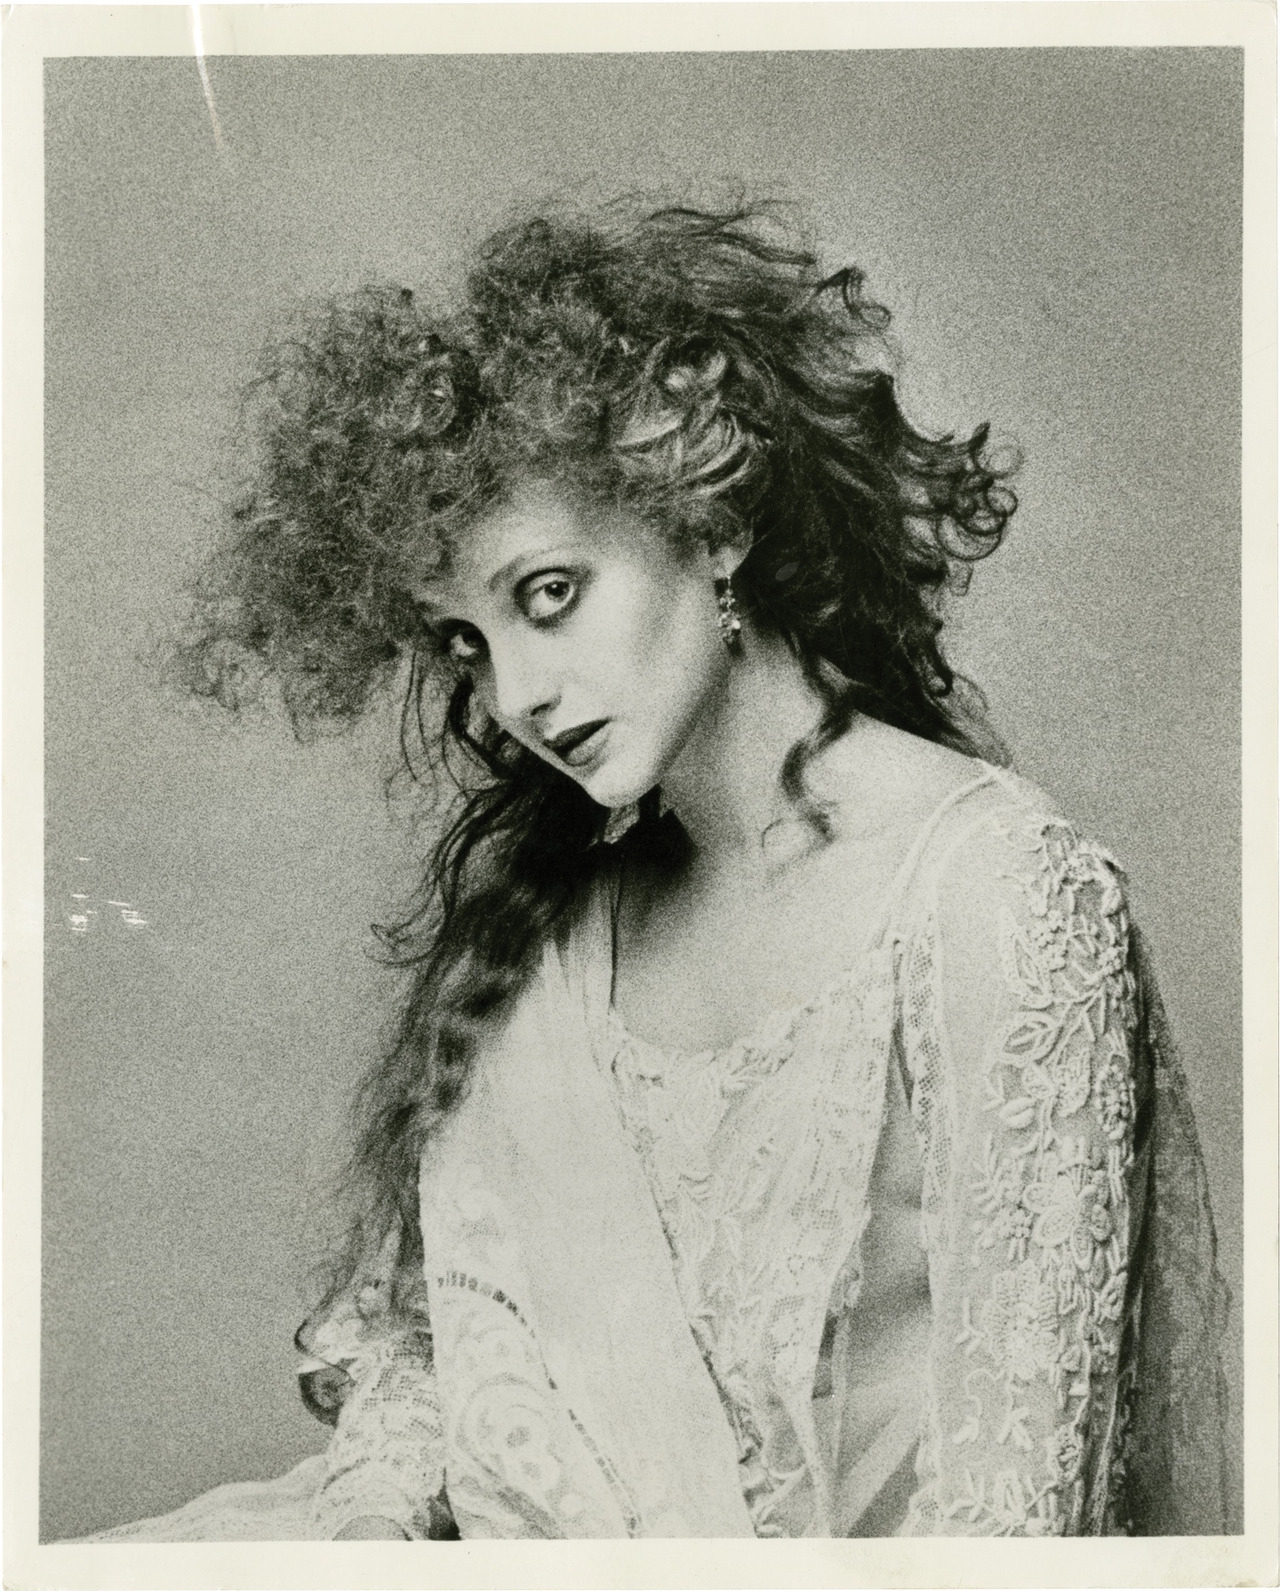 20thcenturyfoxcontractplayer: Carol Kane, 1976 An agency memo on the verso of the